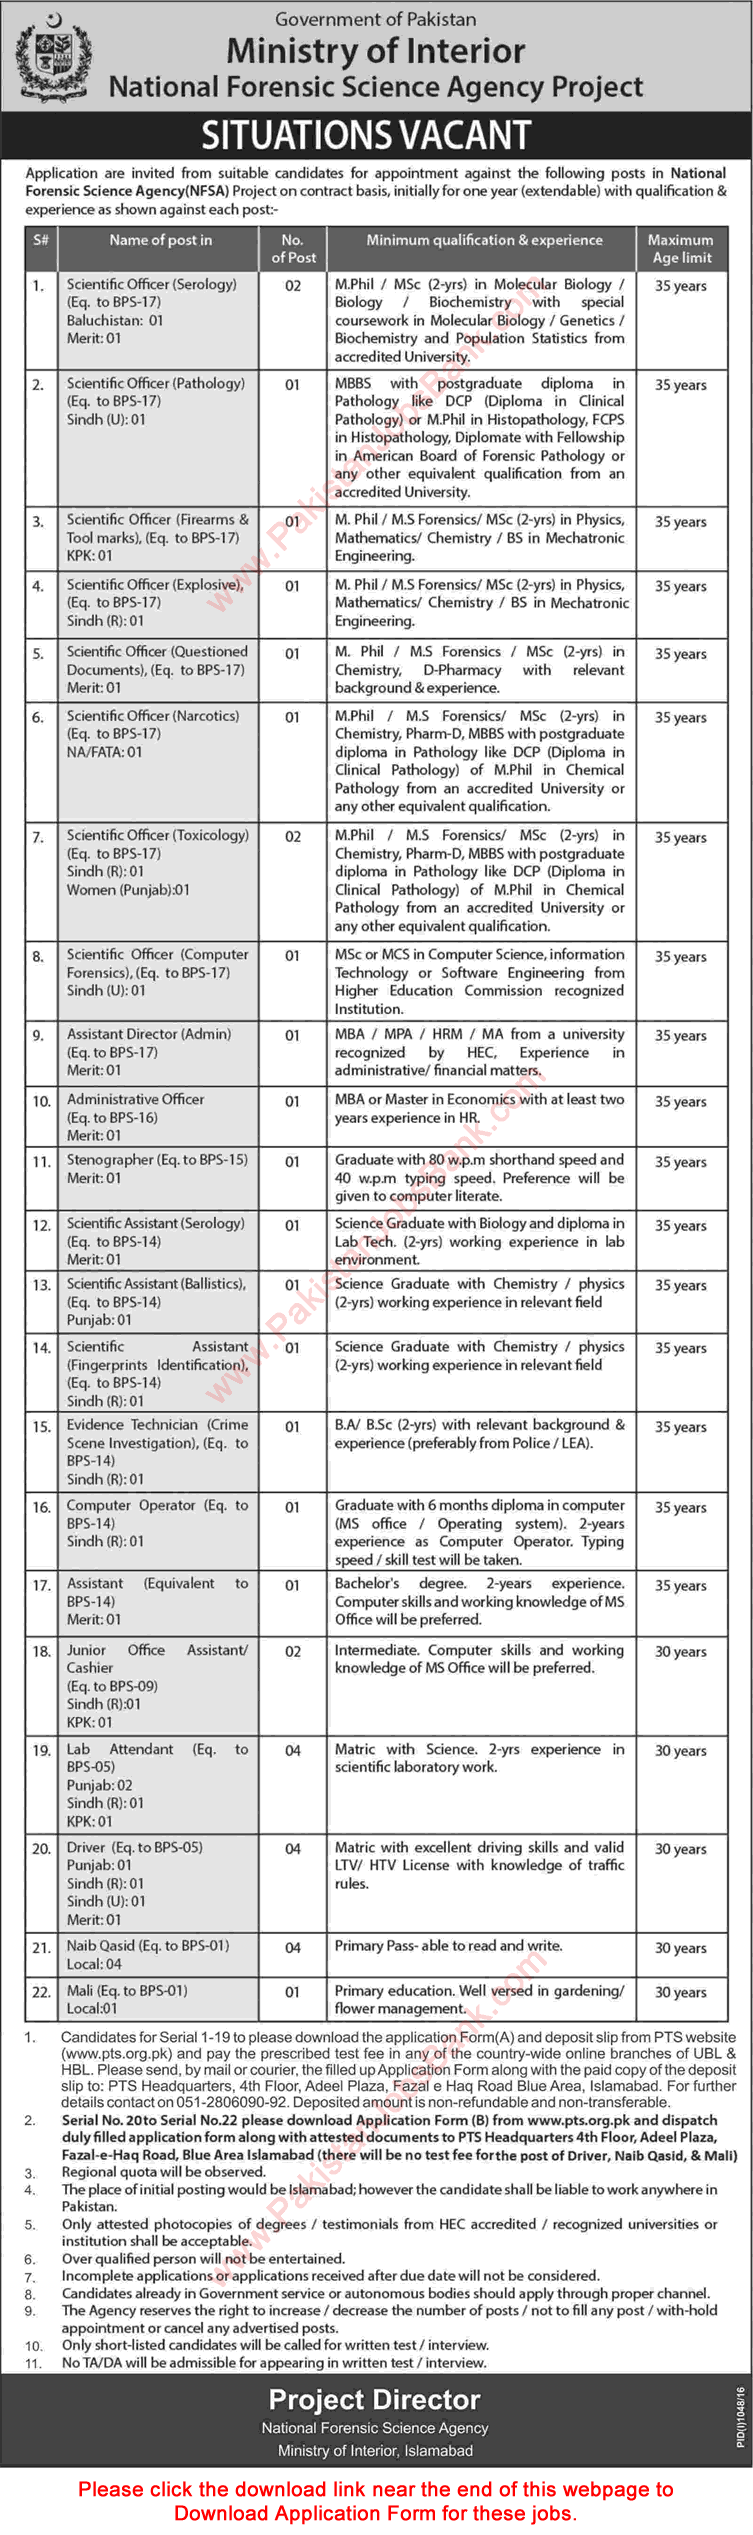 National Forensic Science Agency Islamabad Jobs 2016 August / September NFSA Project PTS Application Form Latest